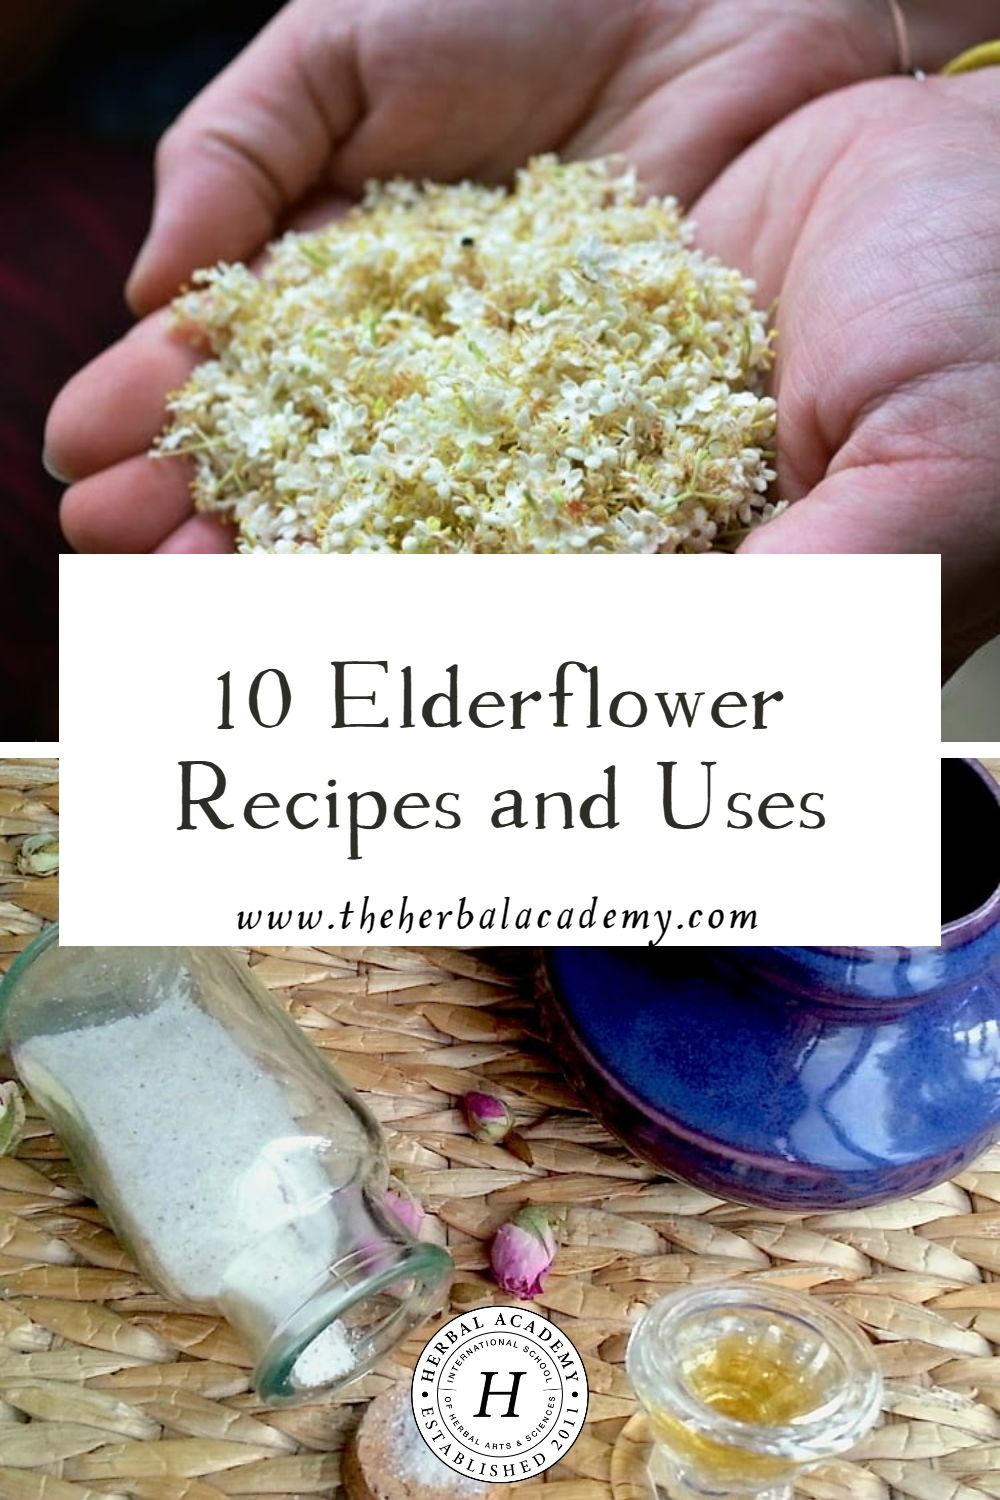 10 Elderflower Recipes and Uses | Herbal Academy | Here is an assortment of elderflower recipes to try yourself. Like us, we hope you find the flower an alluring early-summer resource!